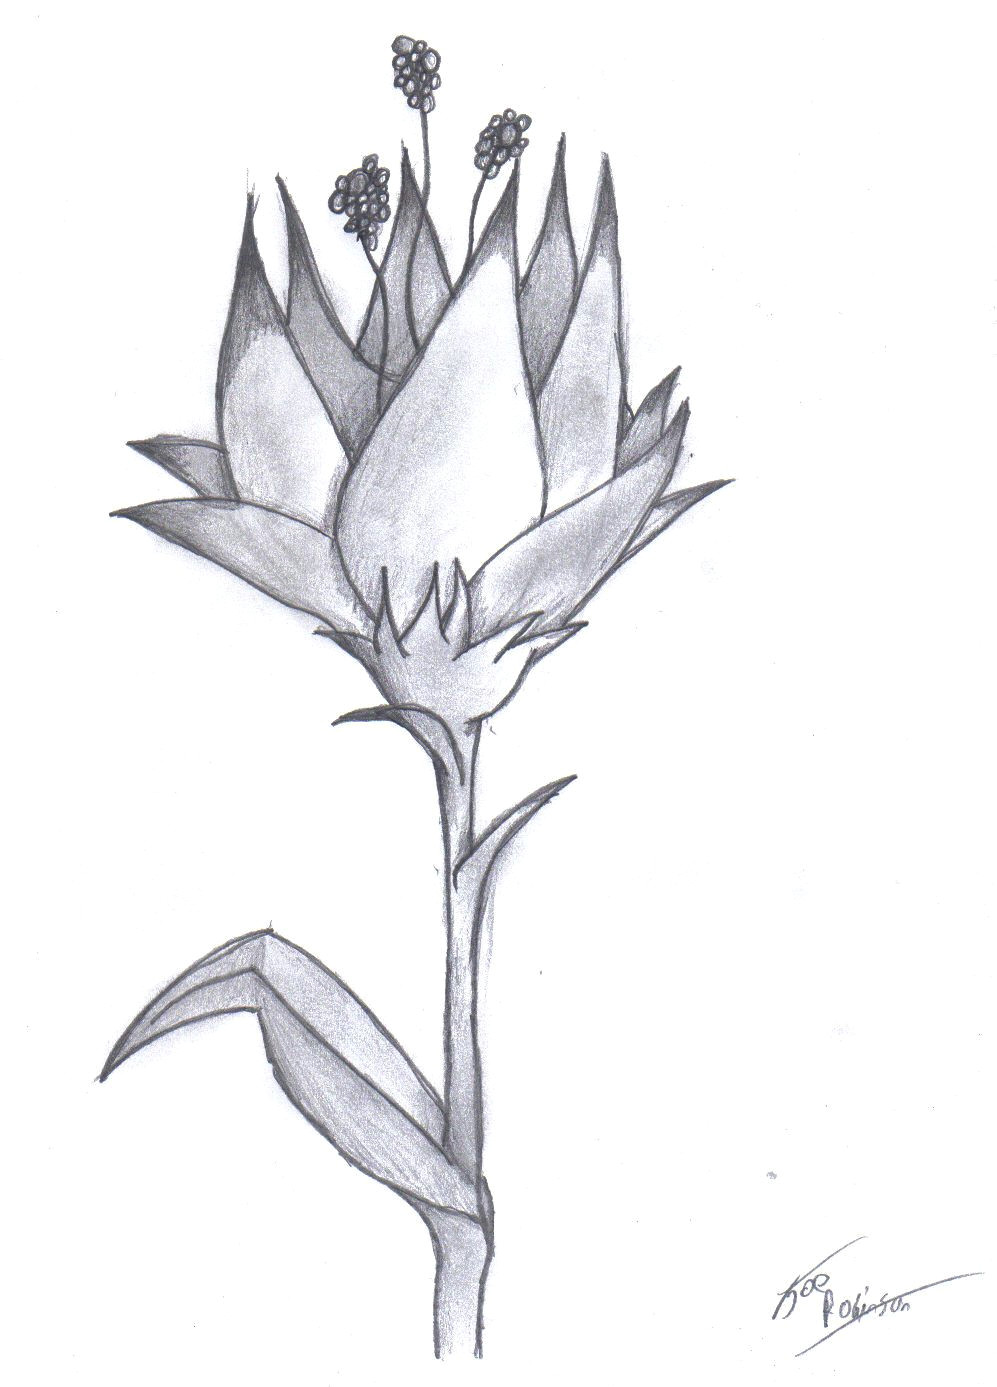 Graphite Drawings Of Flowers Pencil Drawing Of A Flower Amazing Pencil Drawings Flowers